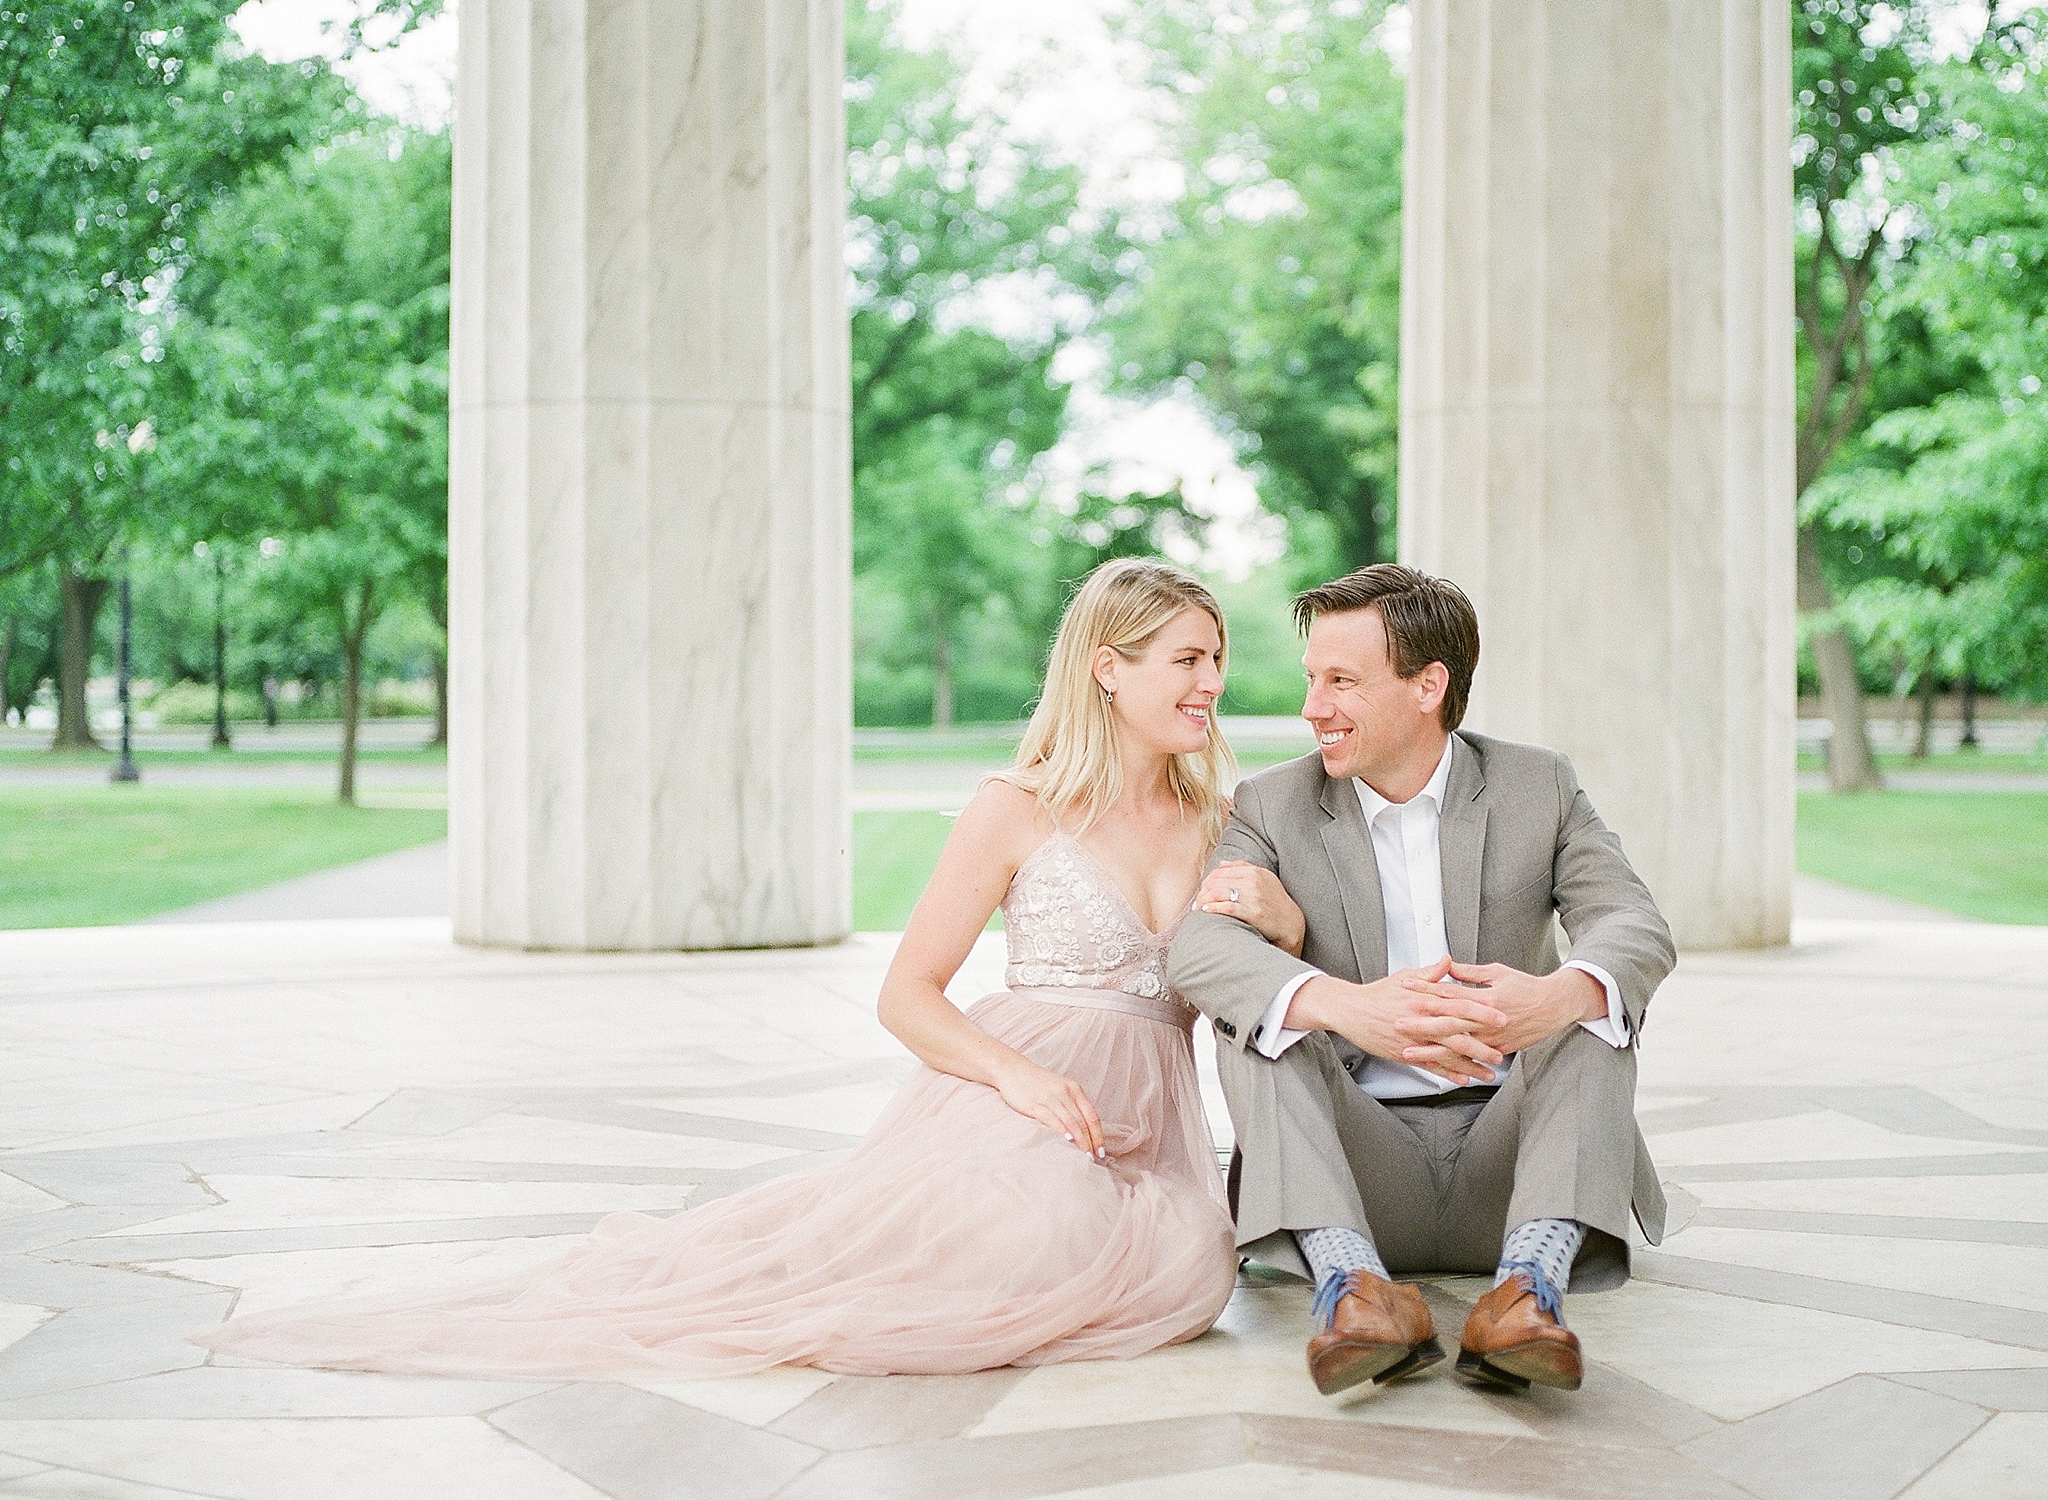 A film anniversary session photographed by Washington, DC photographer, Alicia Lacey, at the iconic Lincoln Memorial and DC War Memorial.